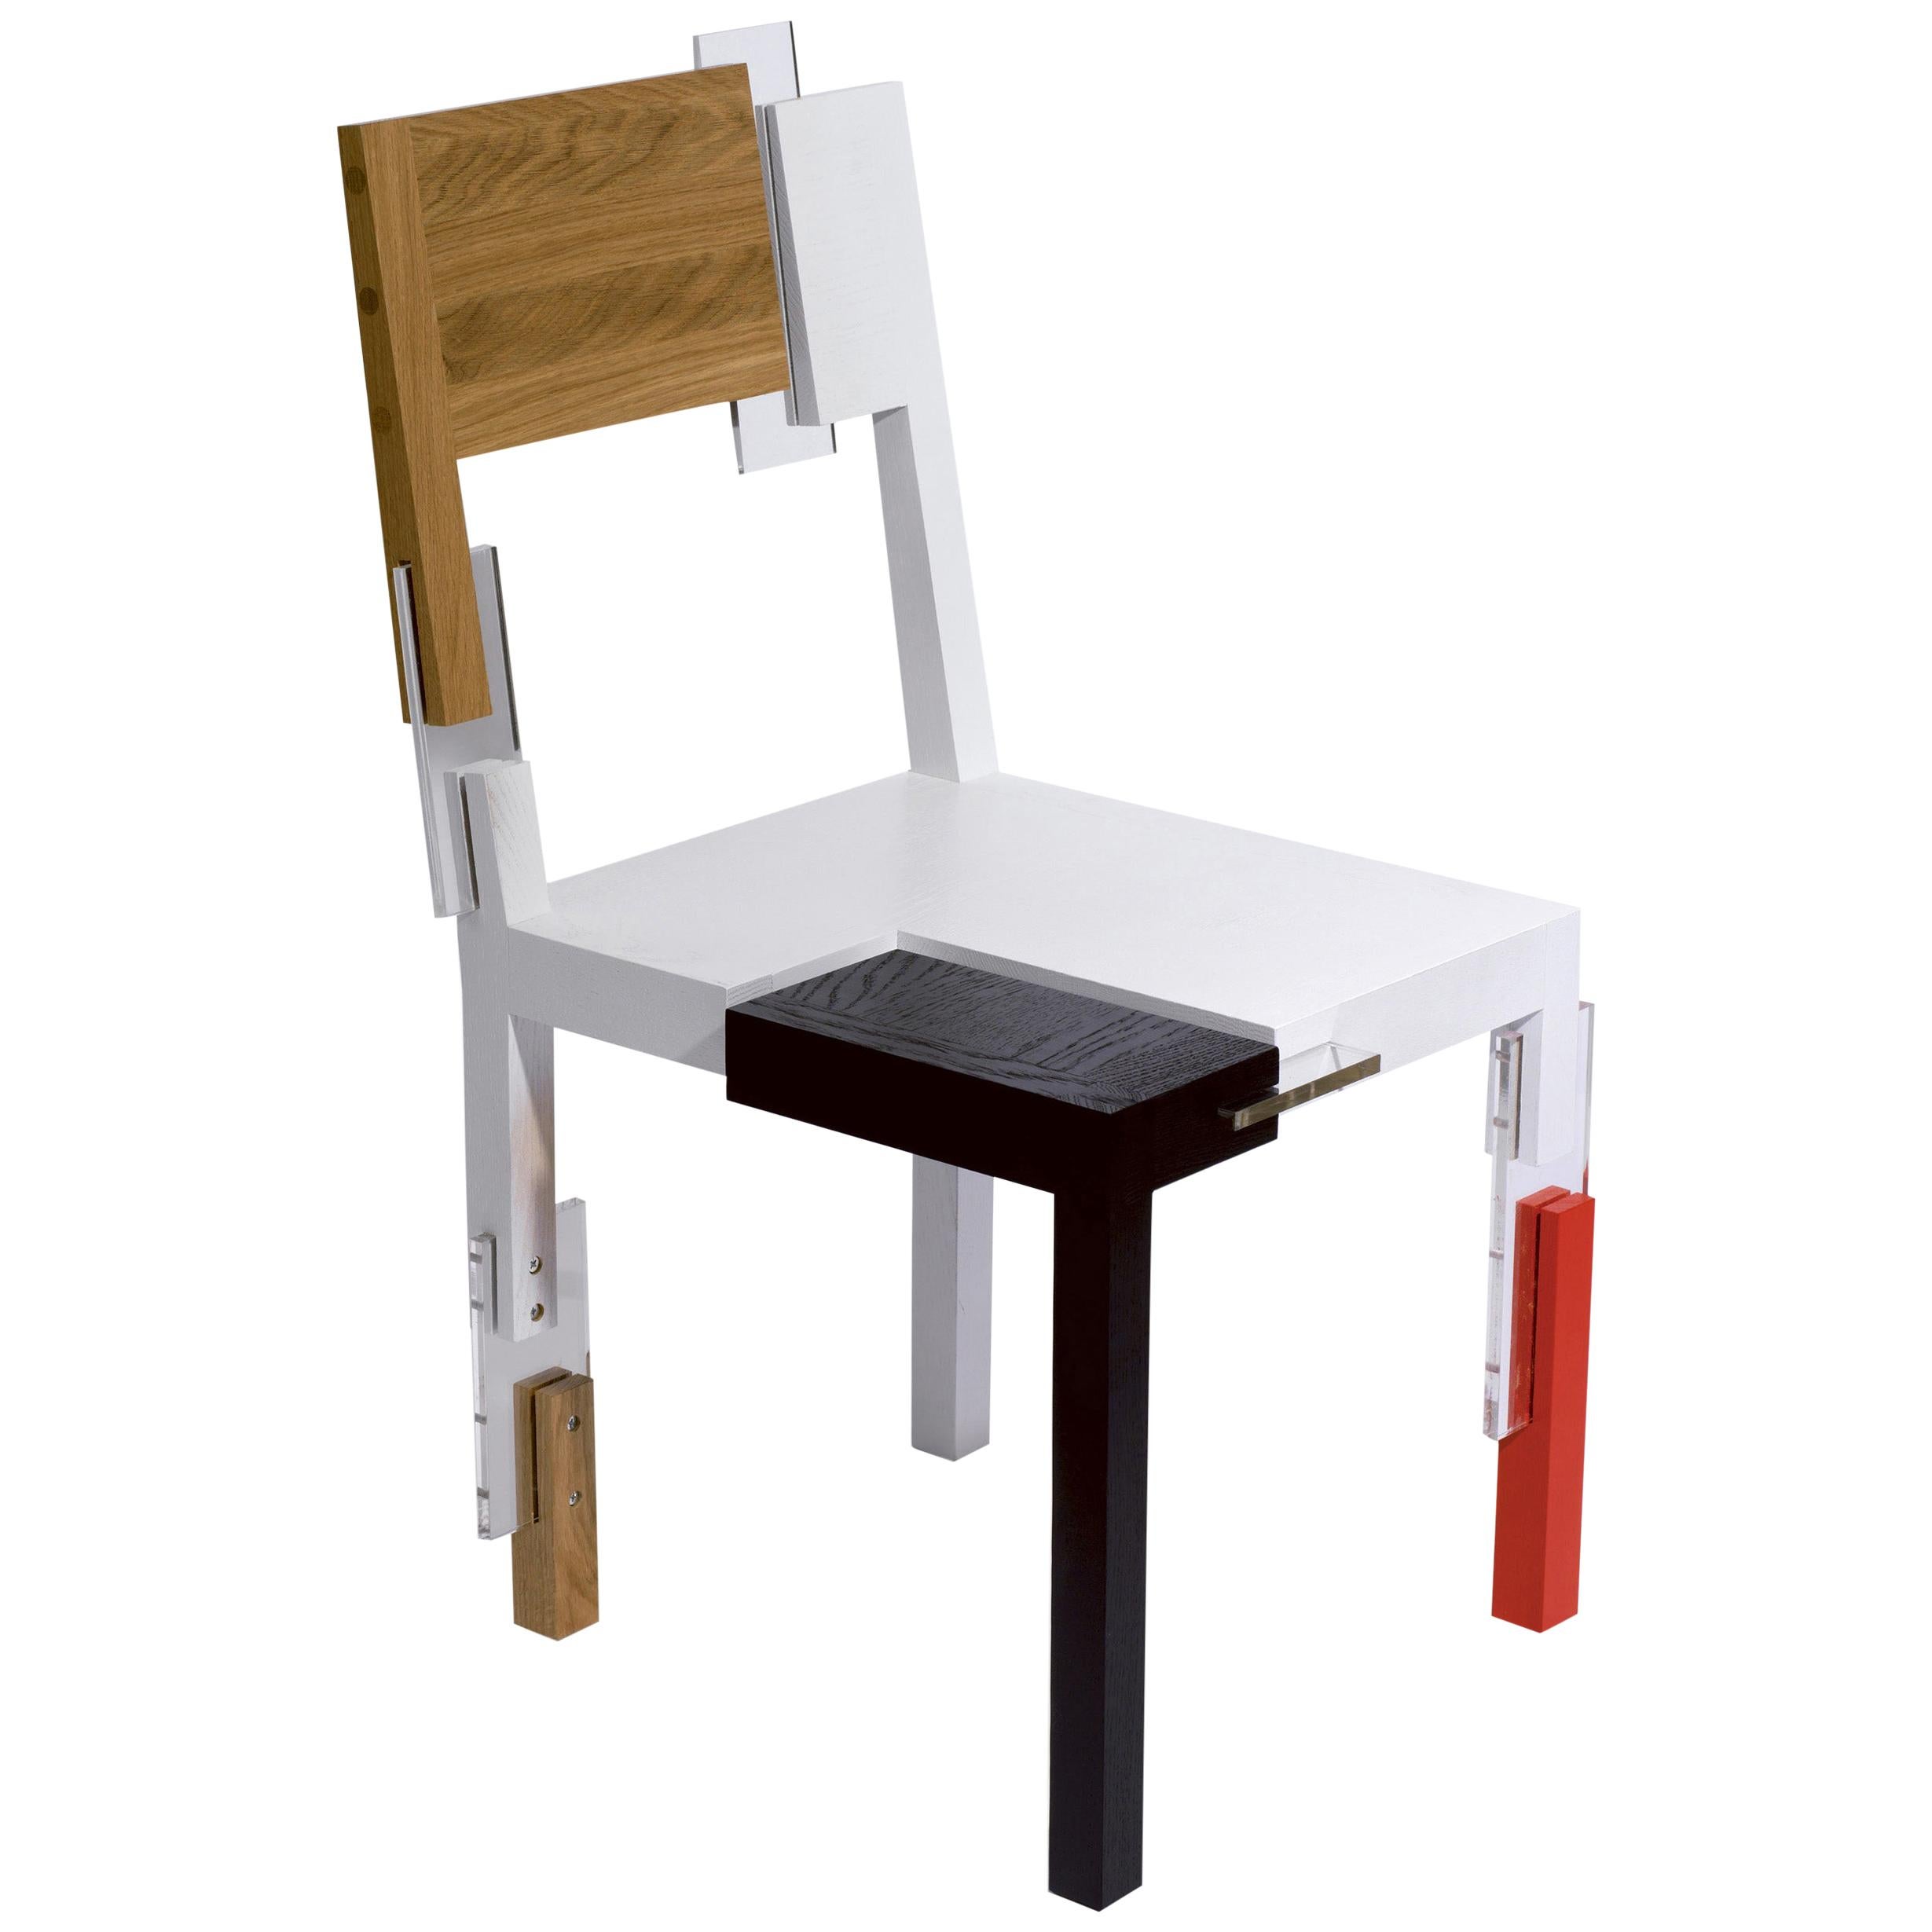 Copy and Paste Chair, Limited Edition